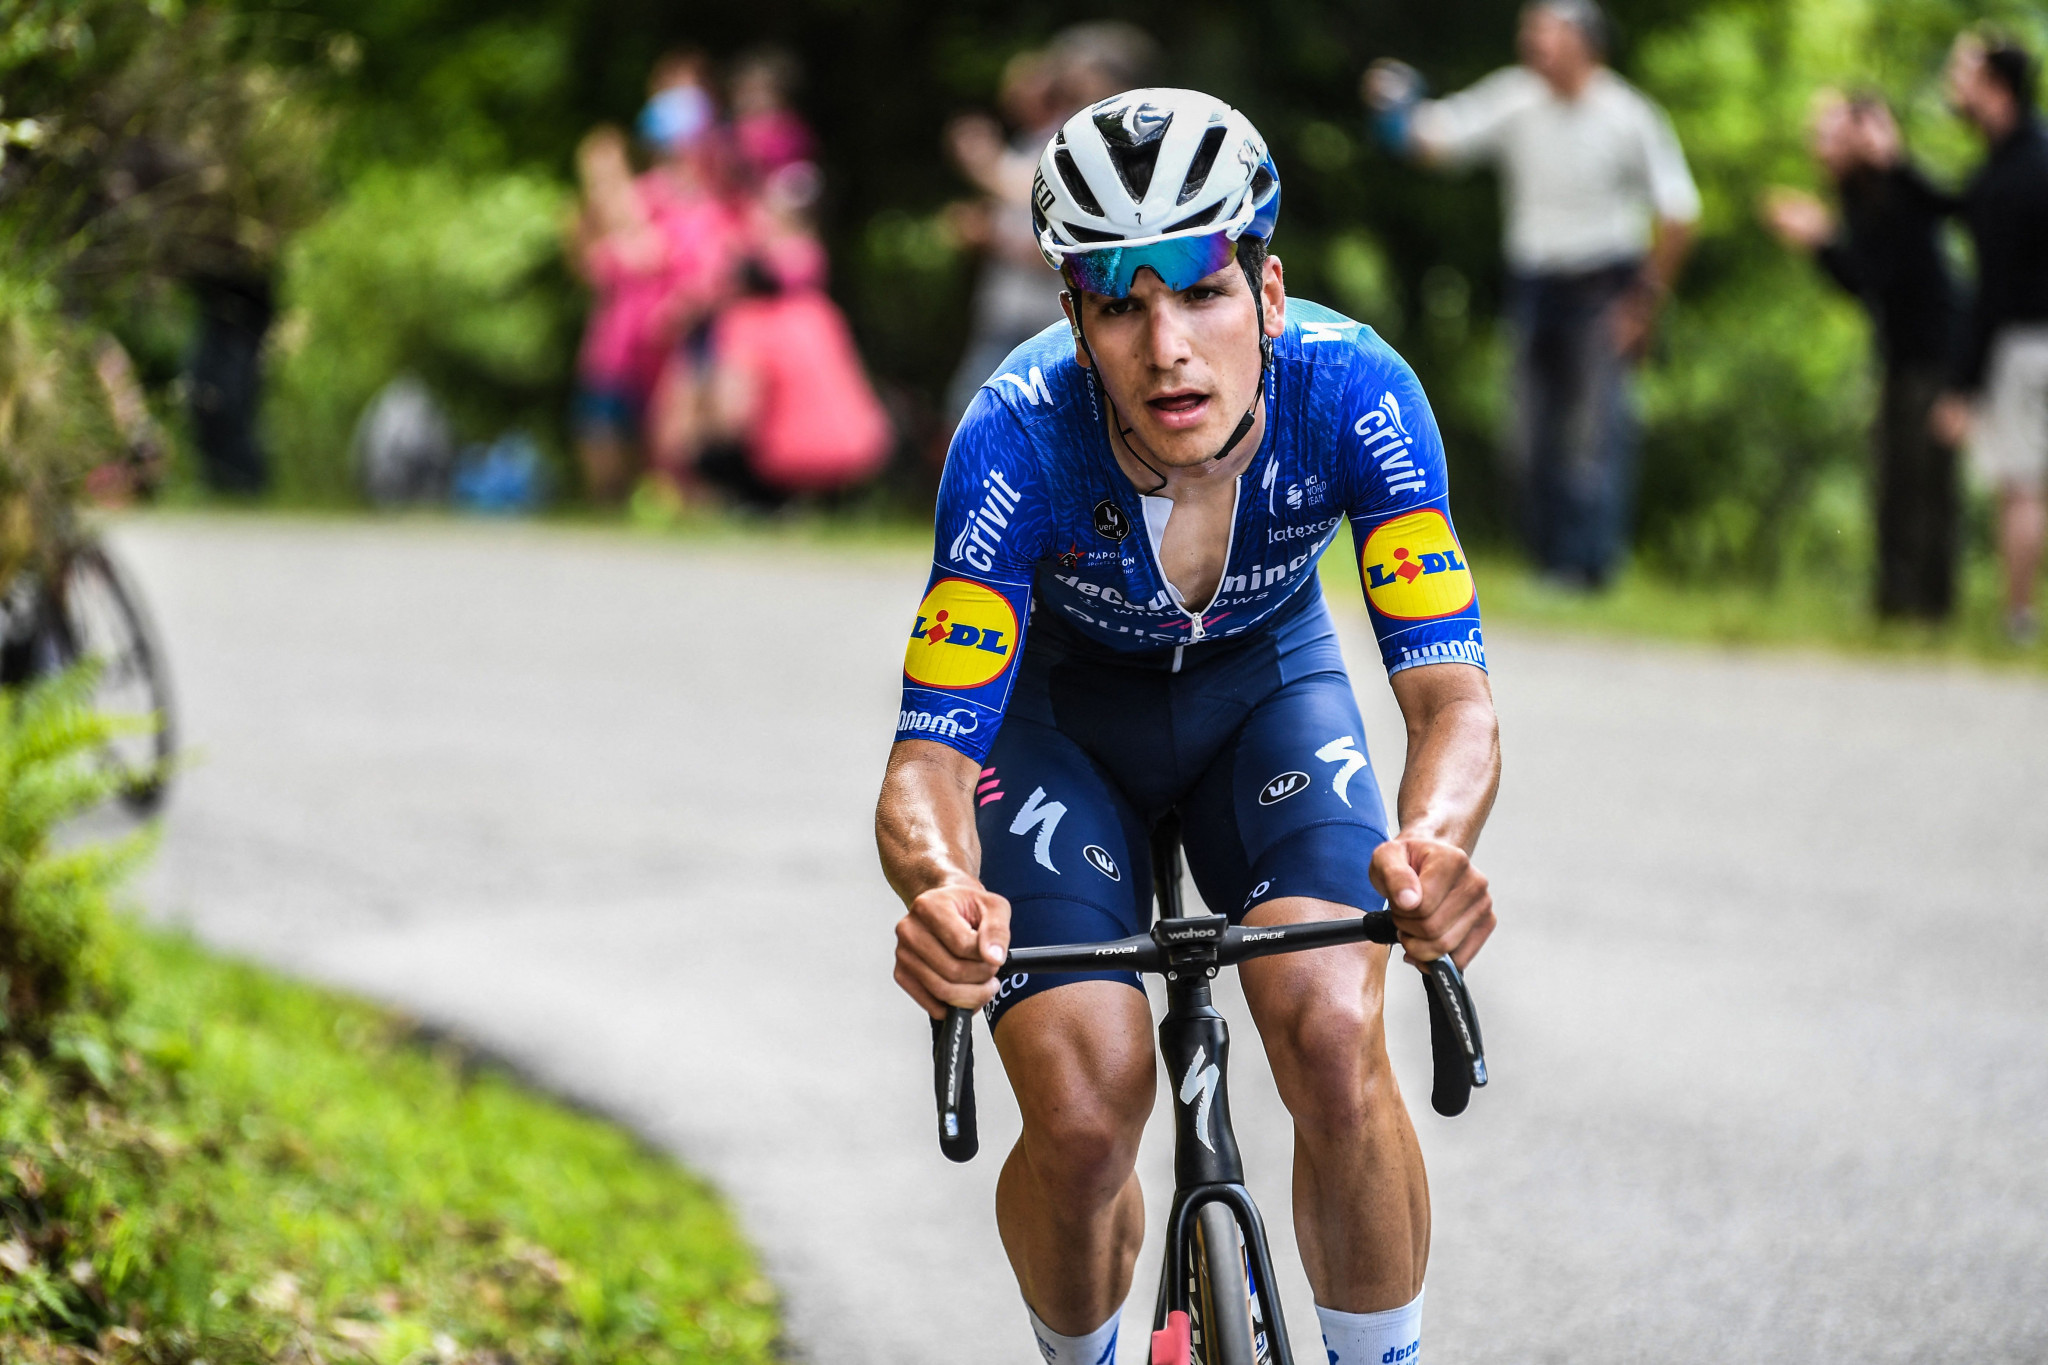 Almeida holds on to win stage two of Tour de Pologne after late attack